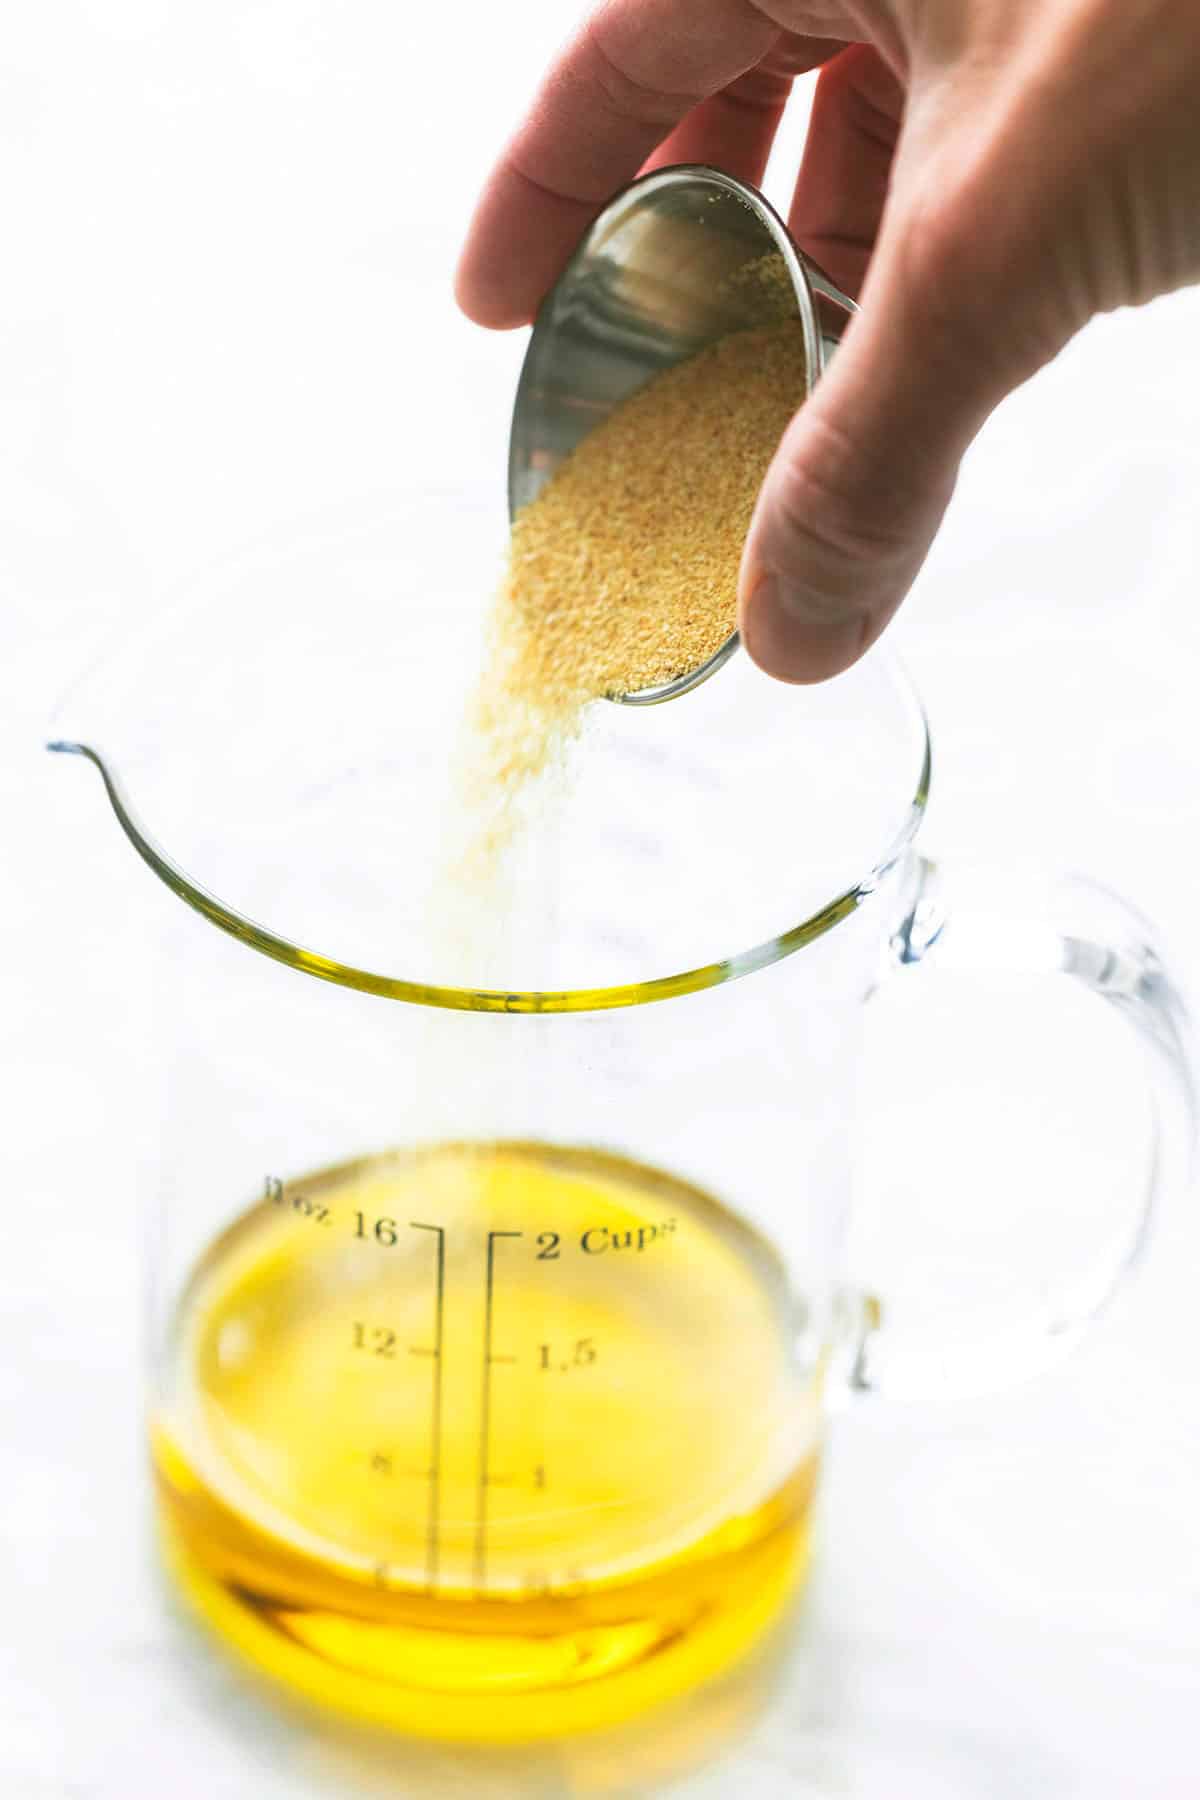 a hand pouring garlic powder into olive oil in a liquid measuring cup.